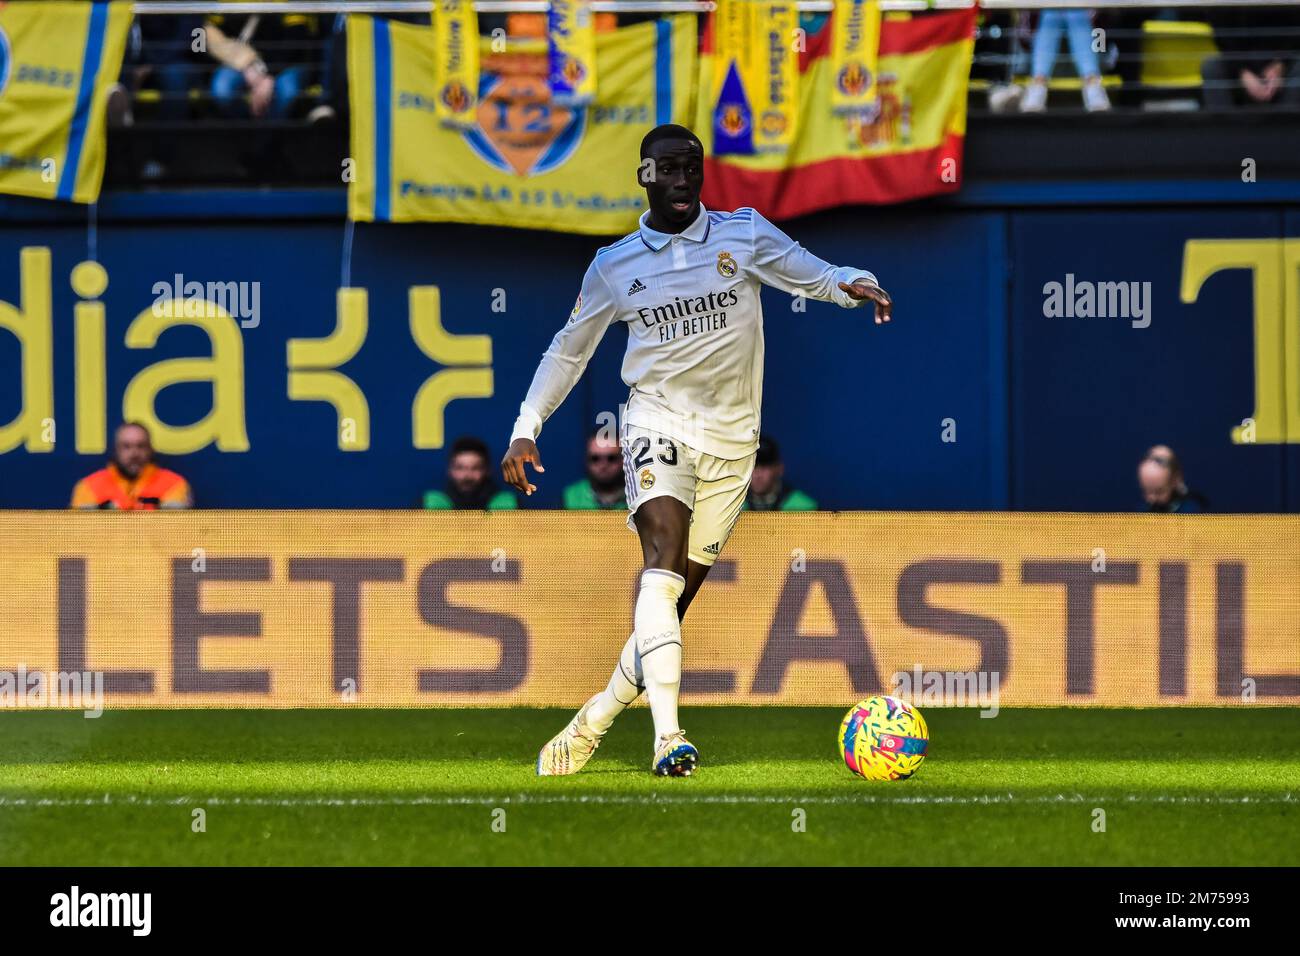 VILLARREAL, SPAIN - JANUARY 7: Ferland Mendy of Real Madrid CF making a pass during the match between Villarreal CF and Real Madrid CF of La Liga Santander on January 7, 2023 at Estadi de la Ceramica in Villarreal, Spain. (Photo by Samuel Carreño/ PX Images) Credit: Px Images/Alamy Live News Stock Photo